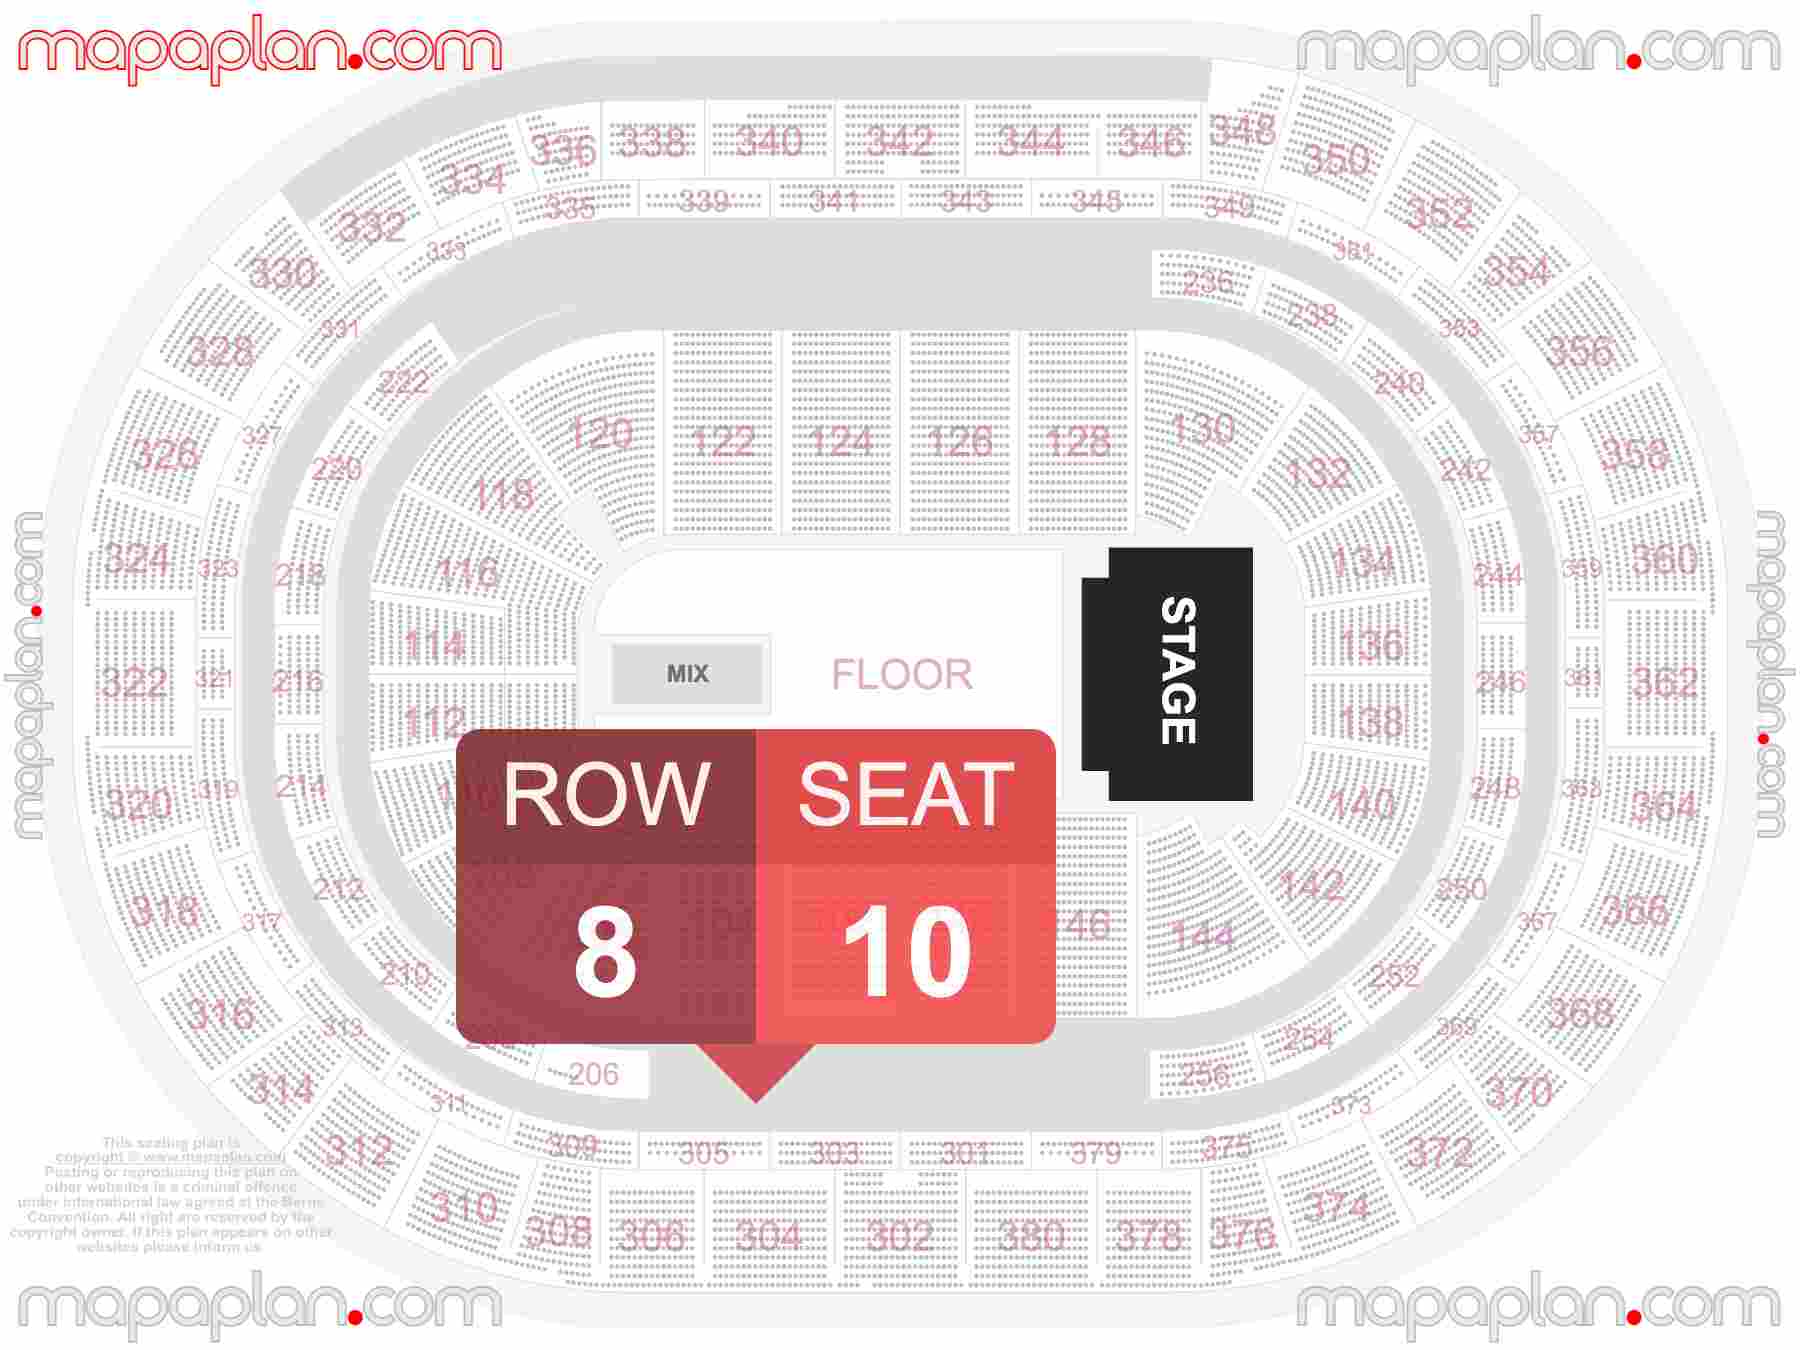 Denver Ball Arena seating chart Concert with floor general admission standing interactive seating checker map plan showing seat numbers per row - Ticket prices sections review diagram